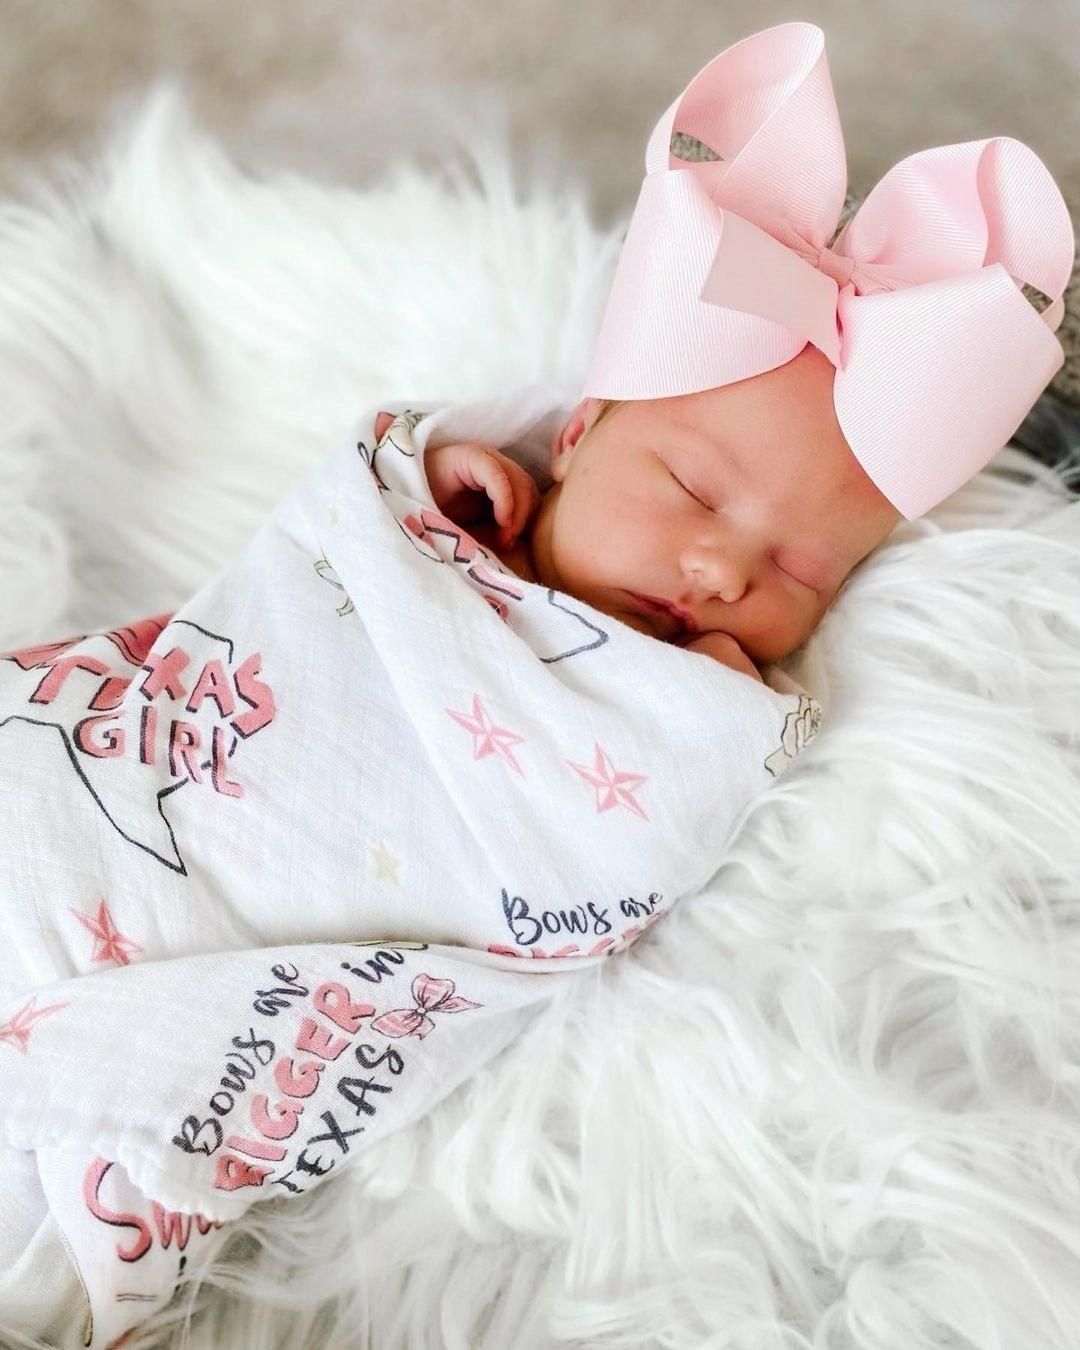 Texas-themed baby girl gift set with a muslin swaddle blanket and burp cloth, featuring pink and white designs.